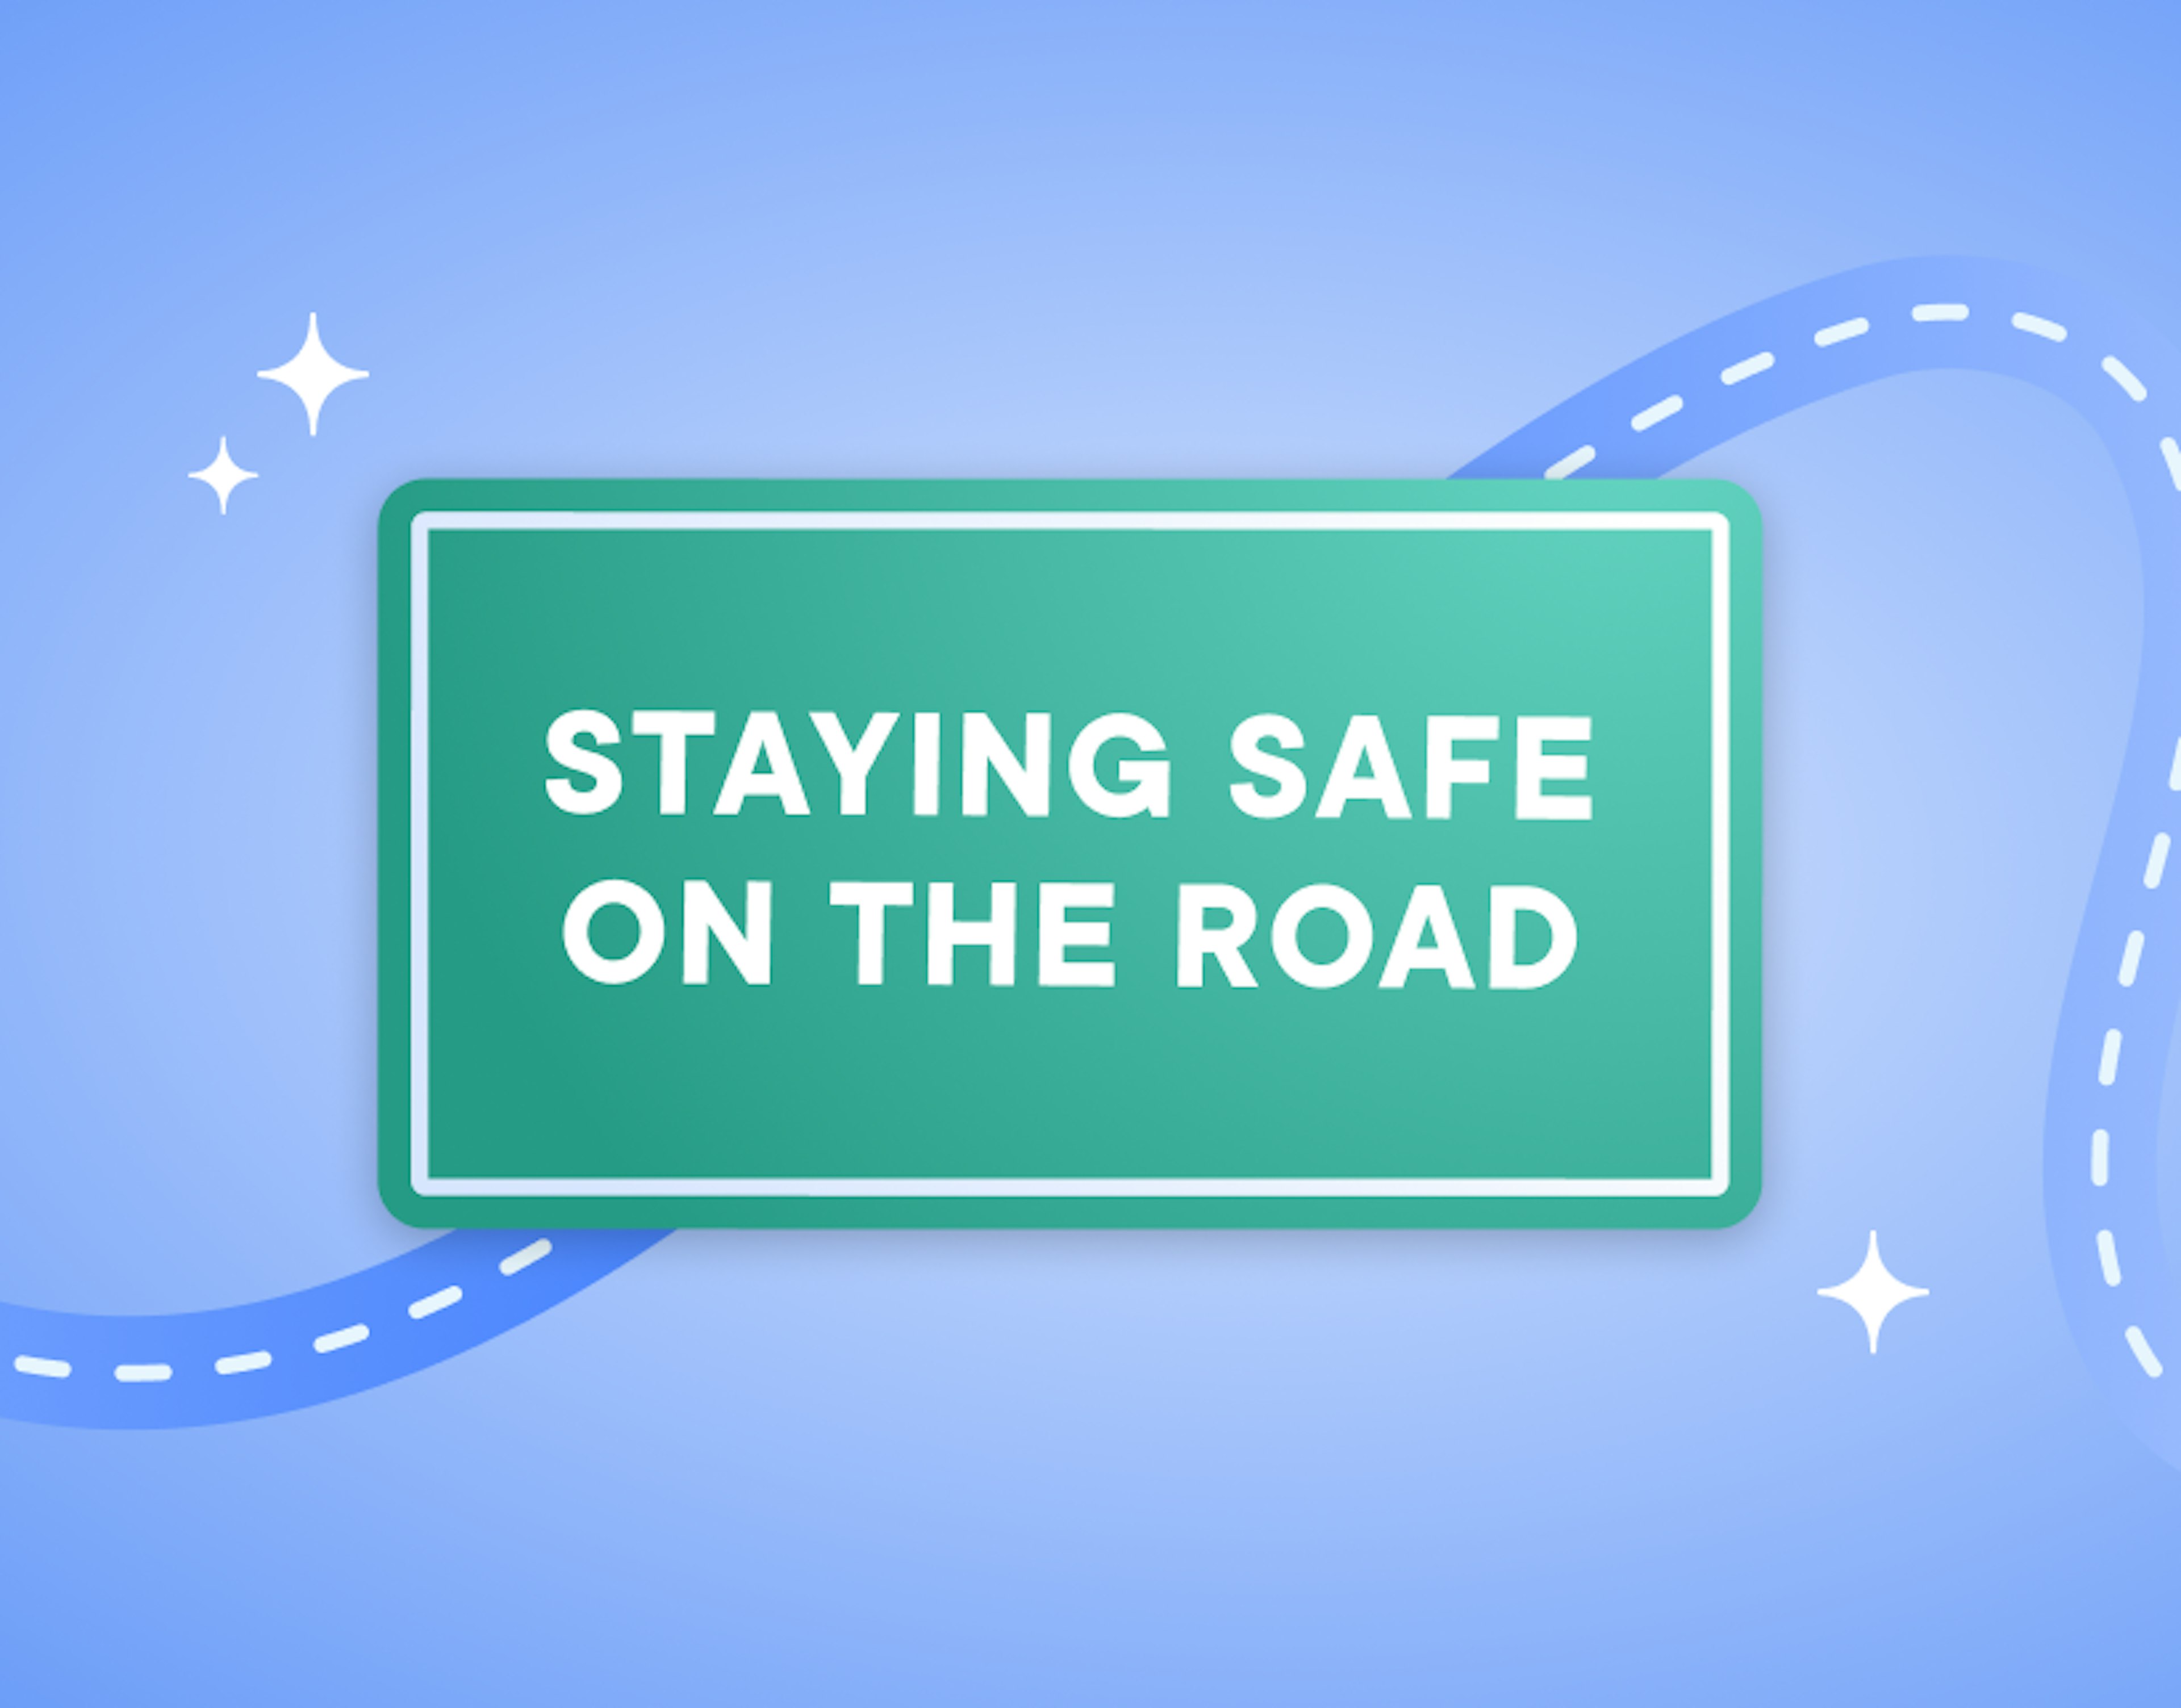 Text that says "Staying safe on the road", inside a green rectange